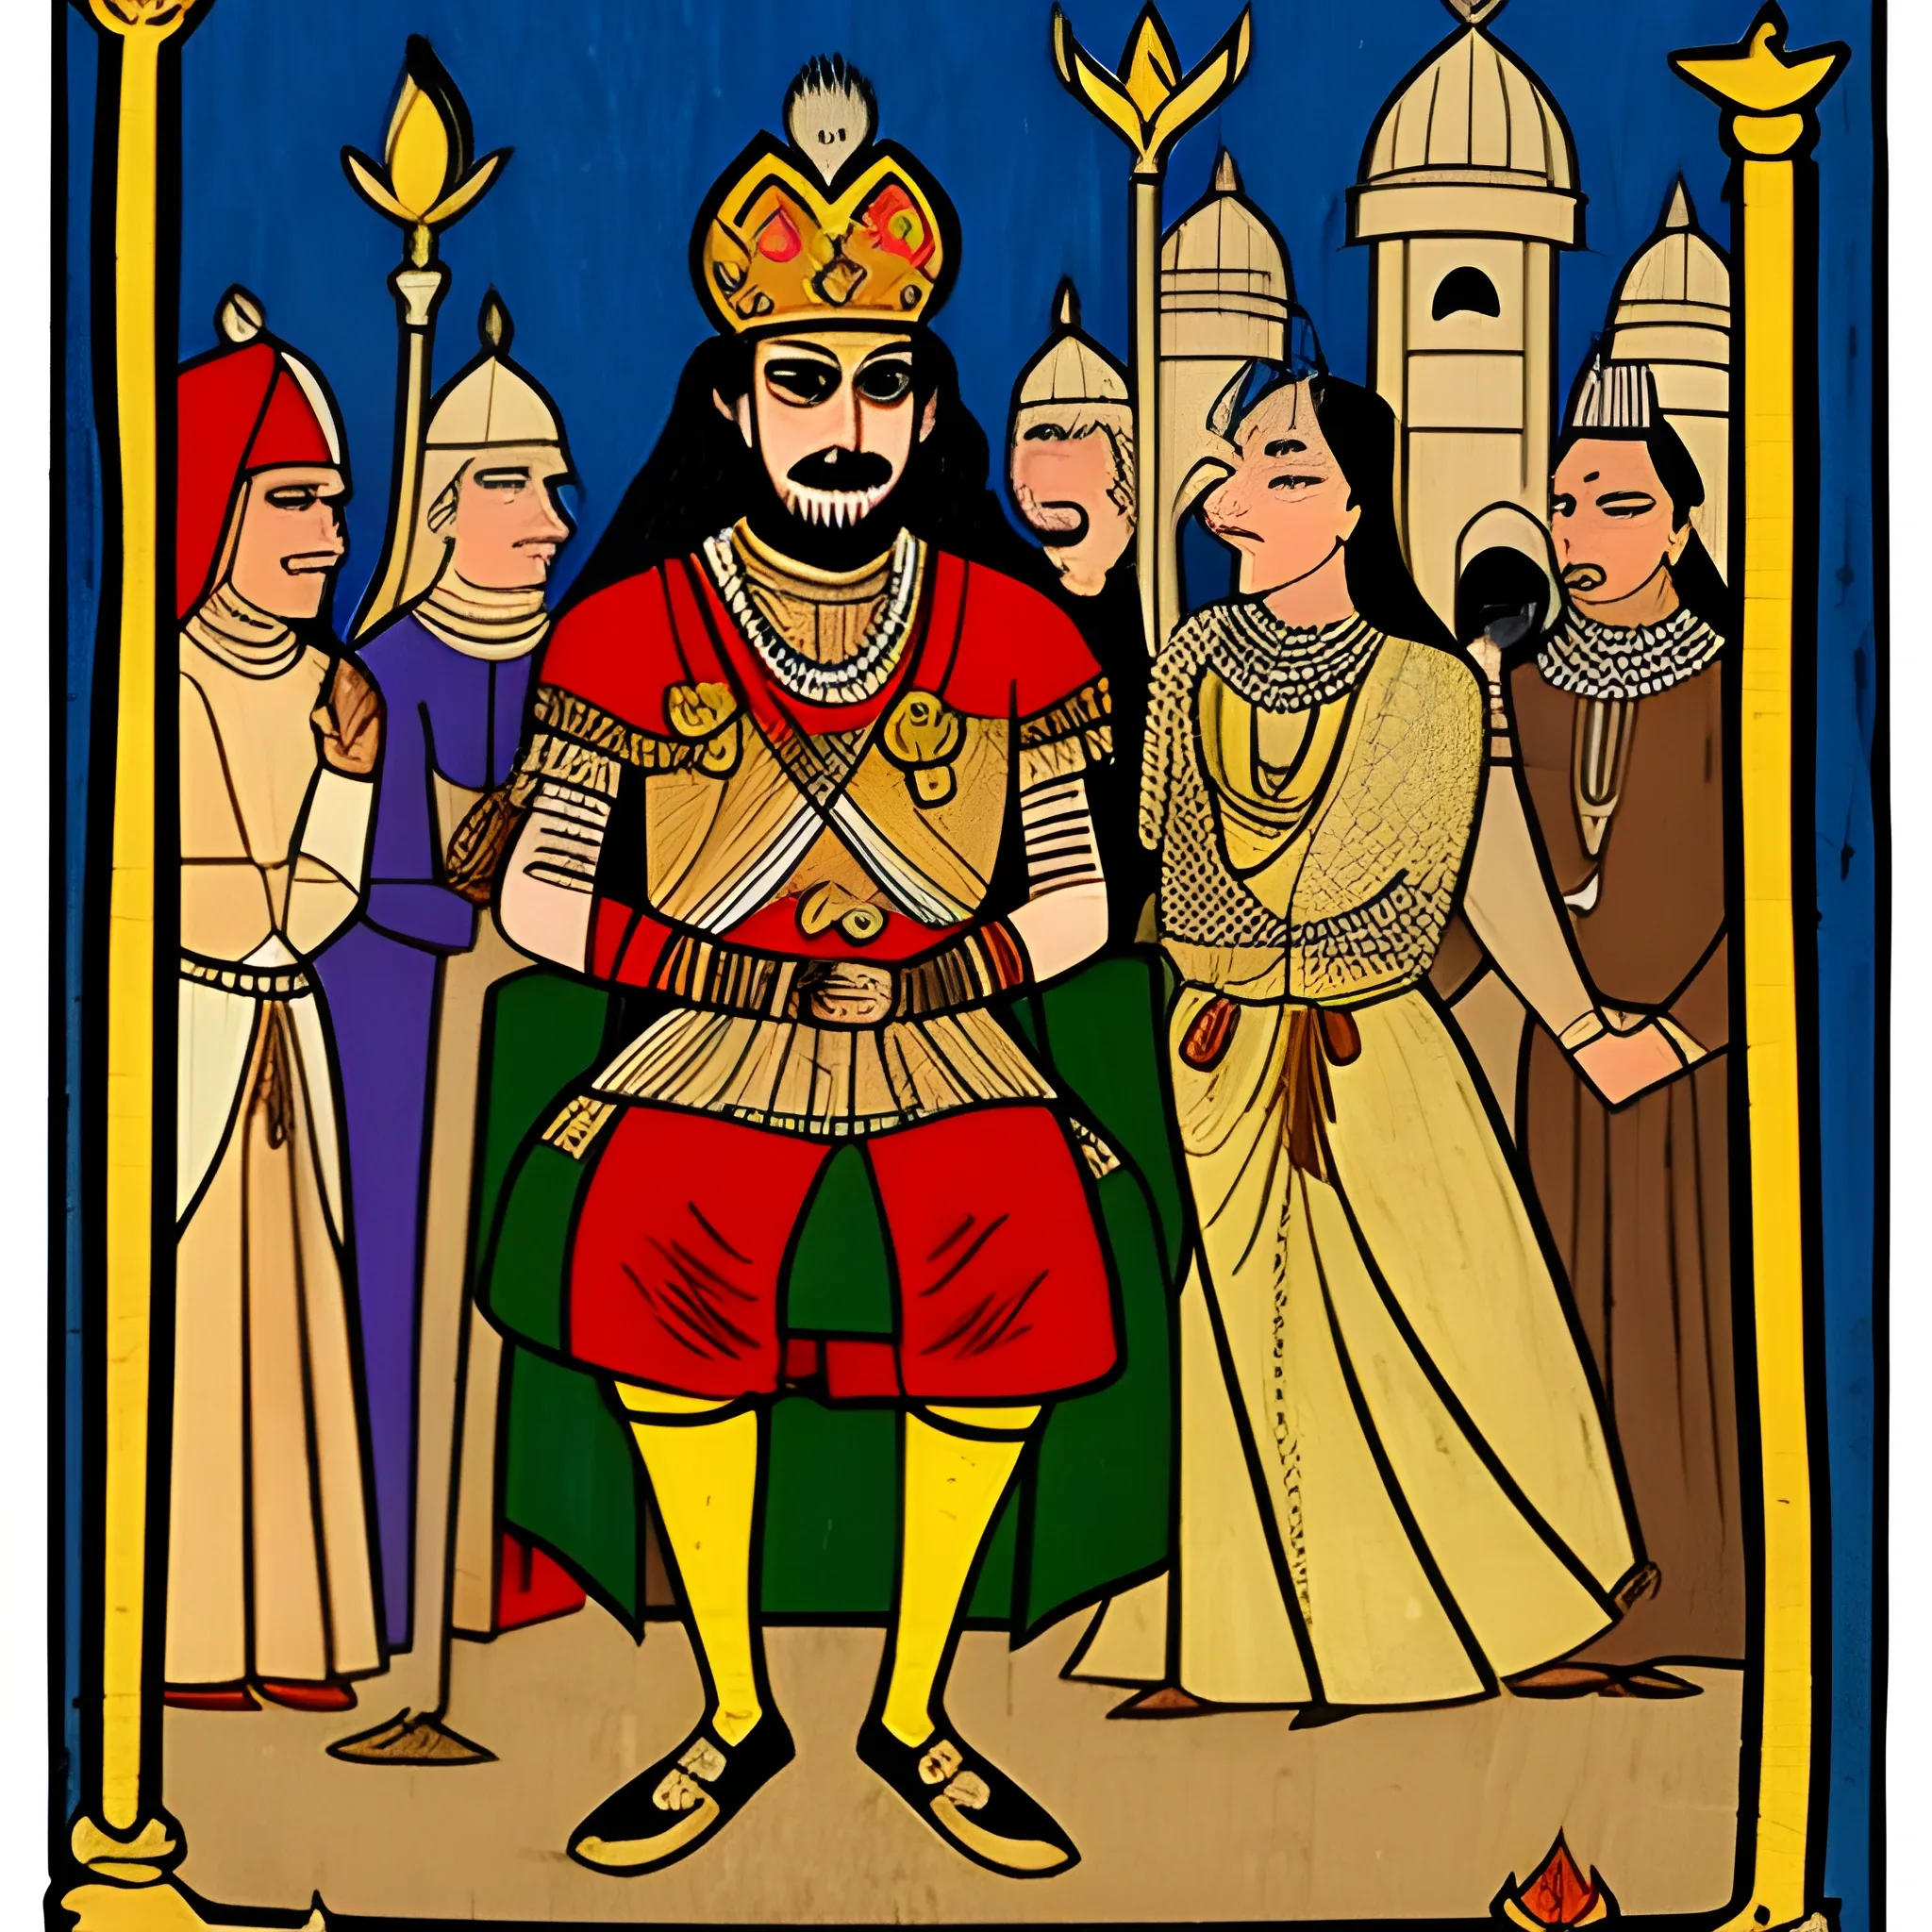 medieval Indian king after victory in war
, Cartoon